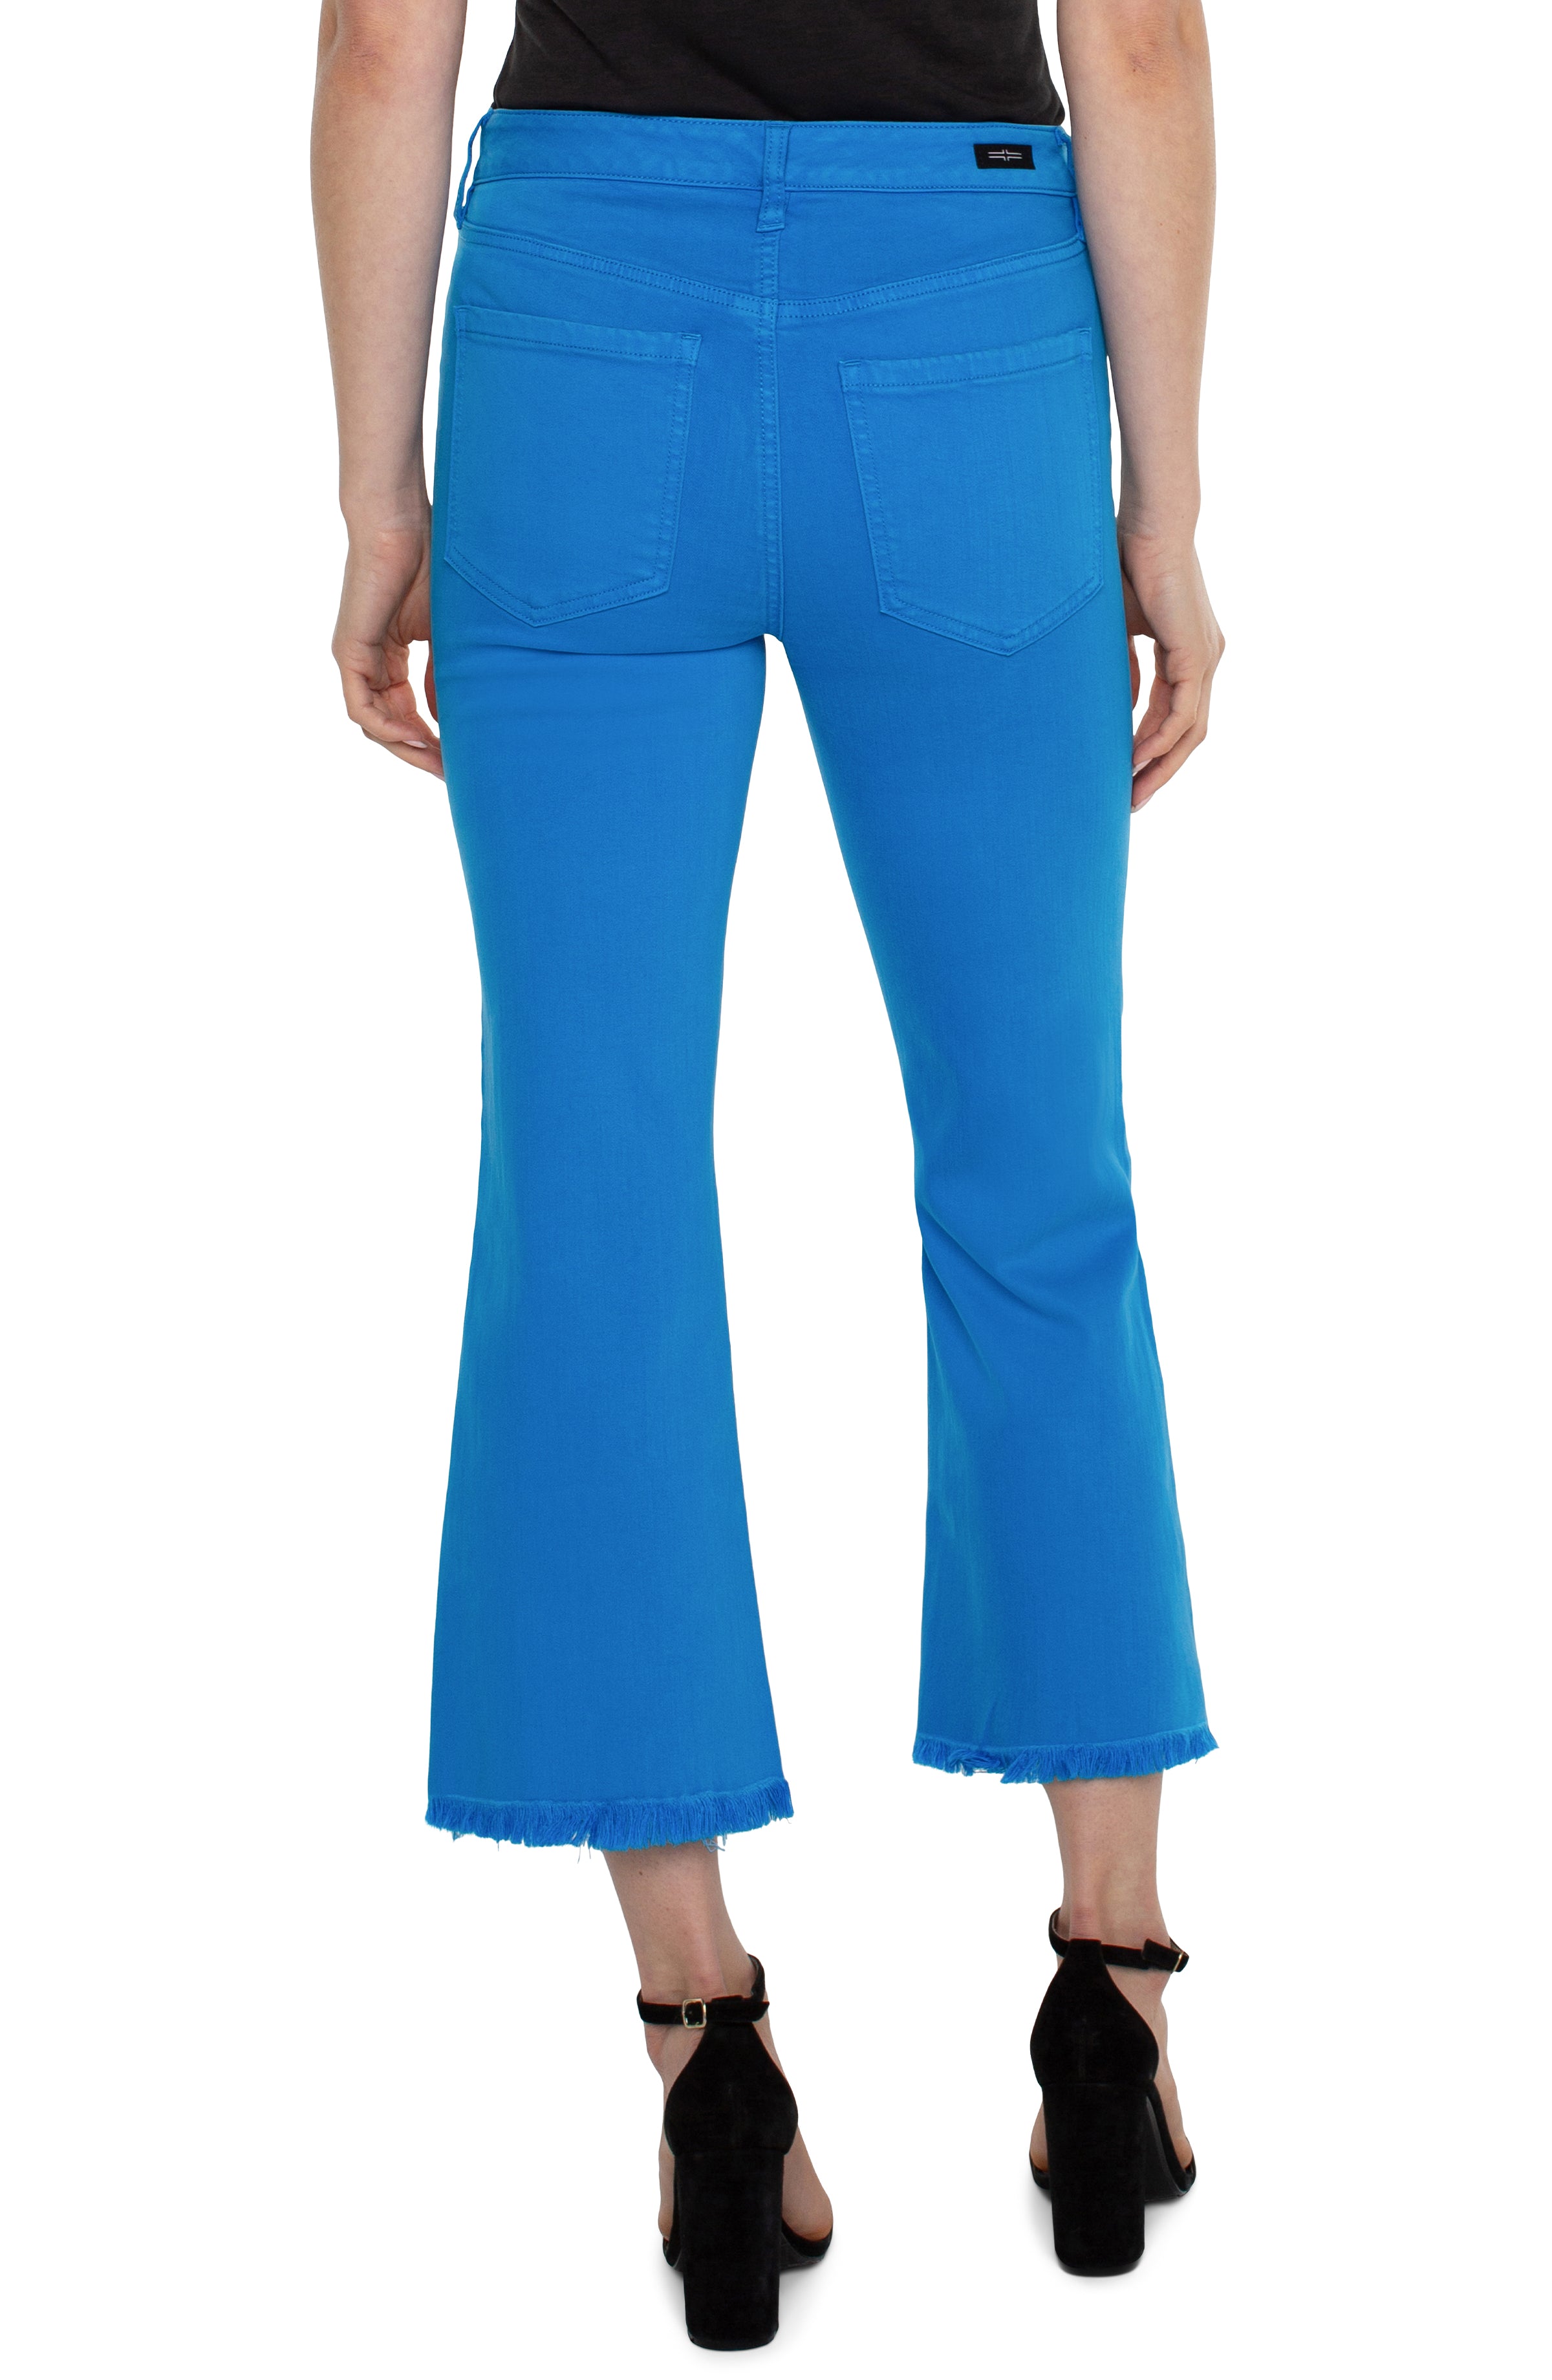 Liverpool Hannah Crop Flare with Fray Hem - Diva Blue Back View